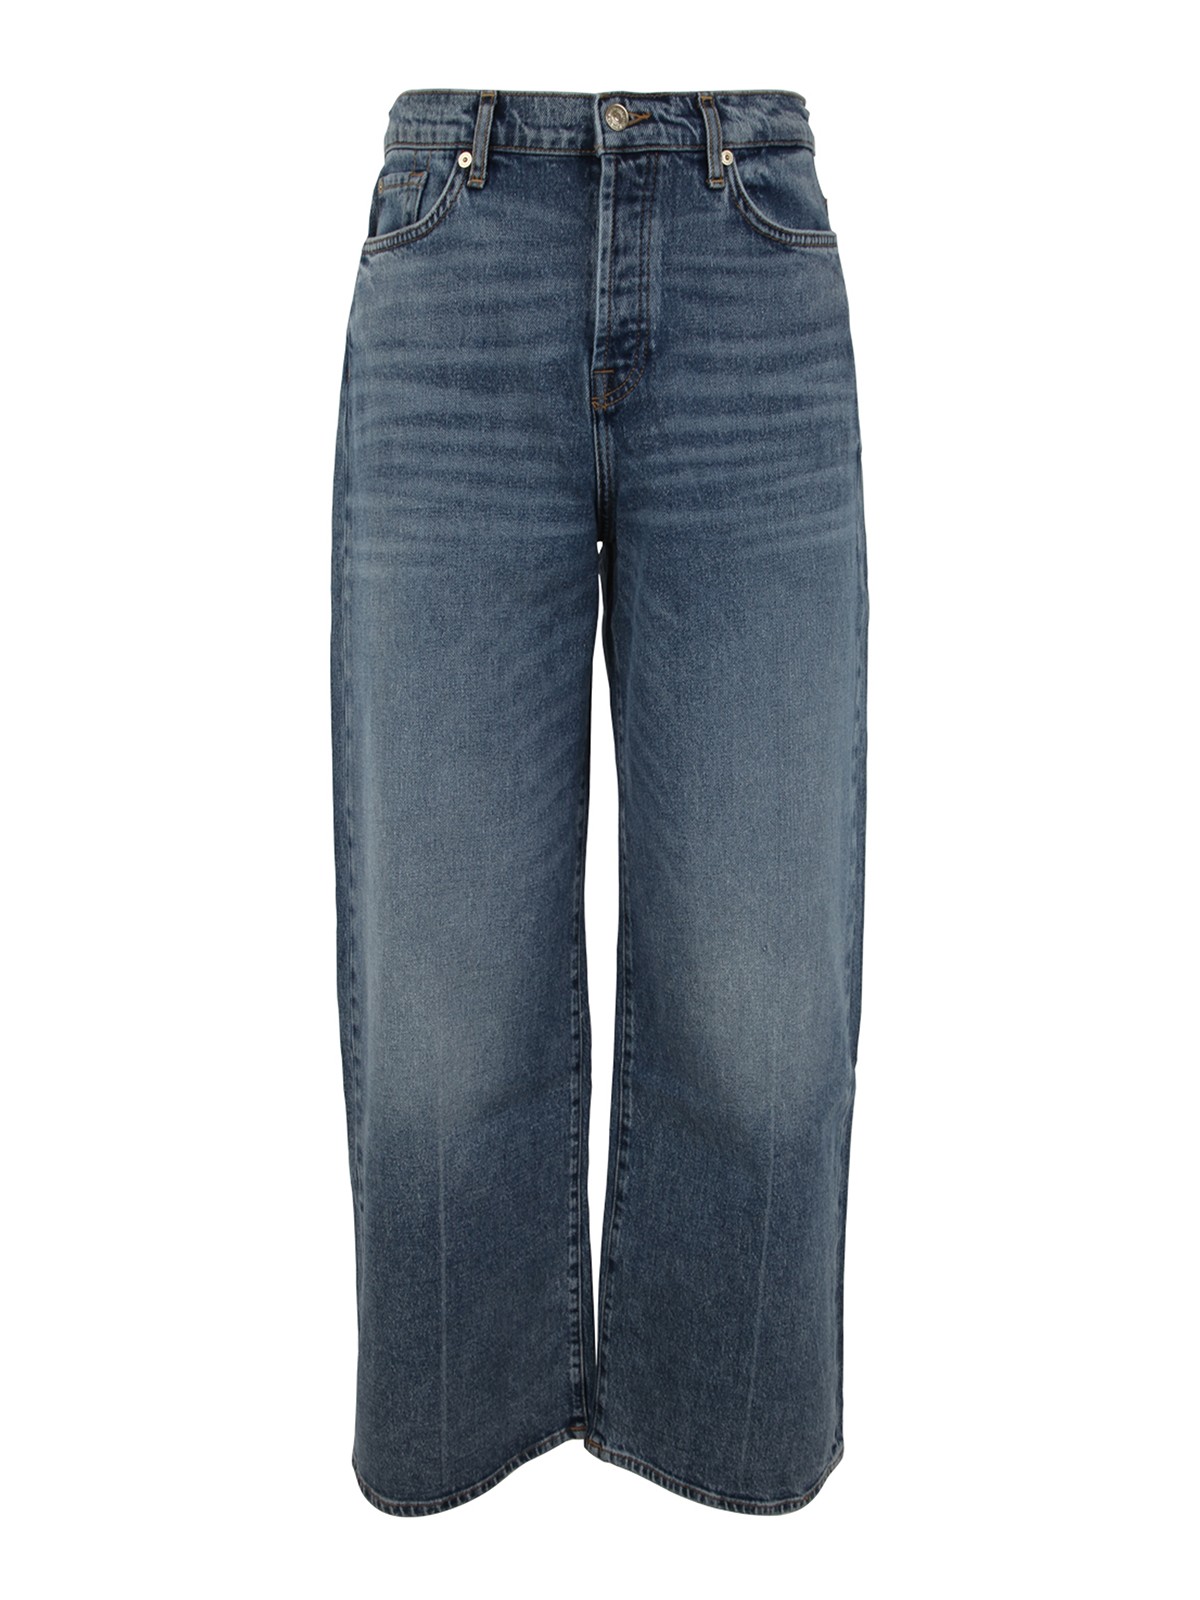 Straight leg jeans 7 For All Mankind - Zoey - JSZOC100PLLIGHT